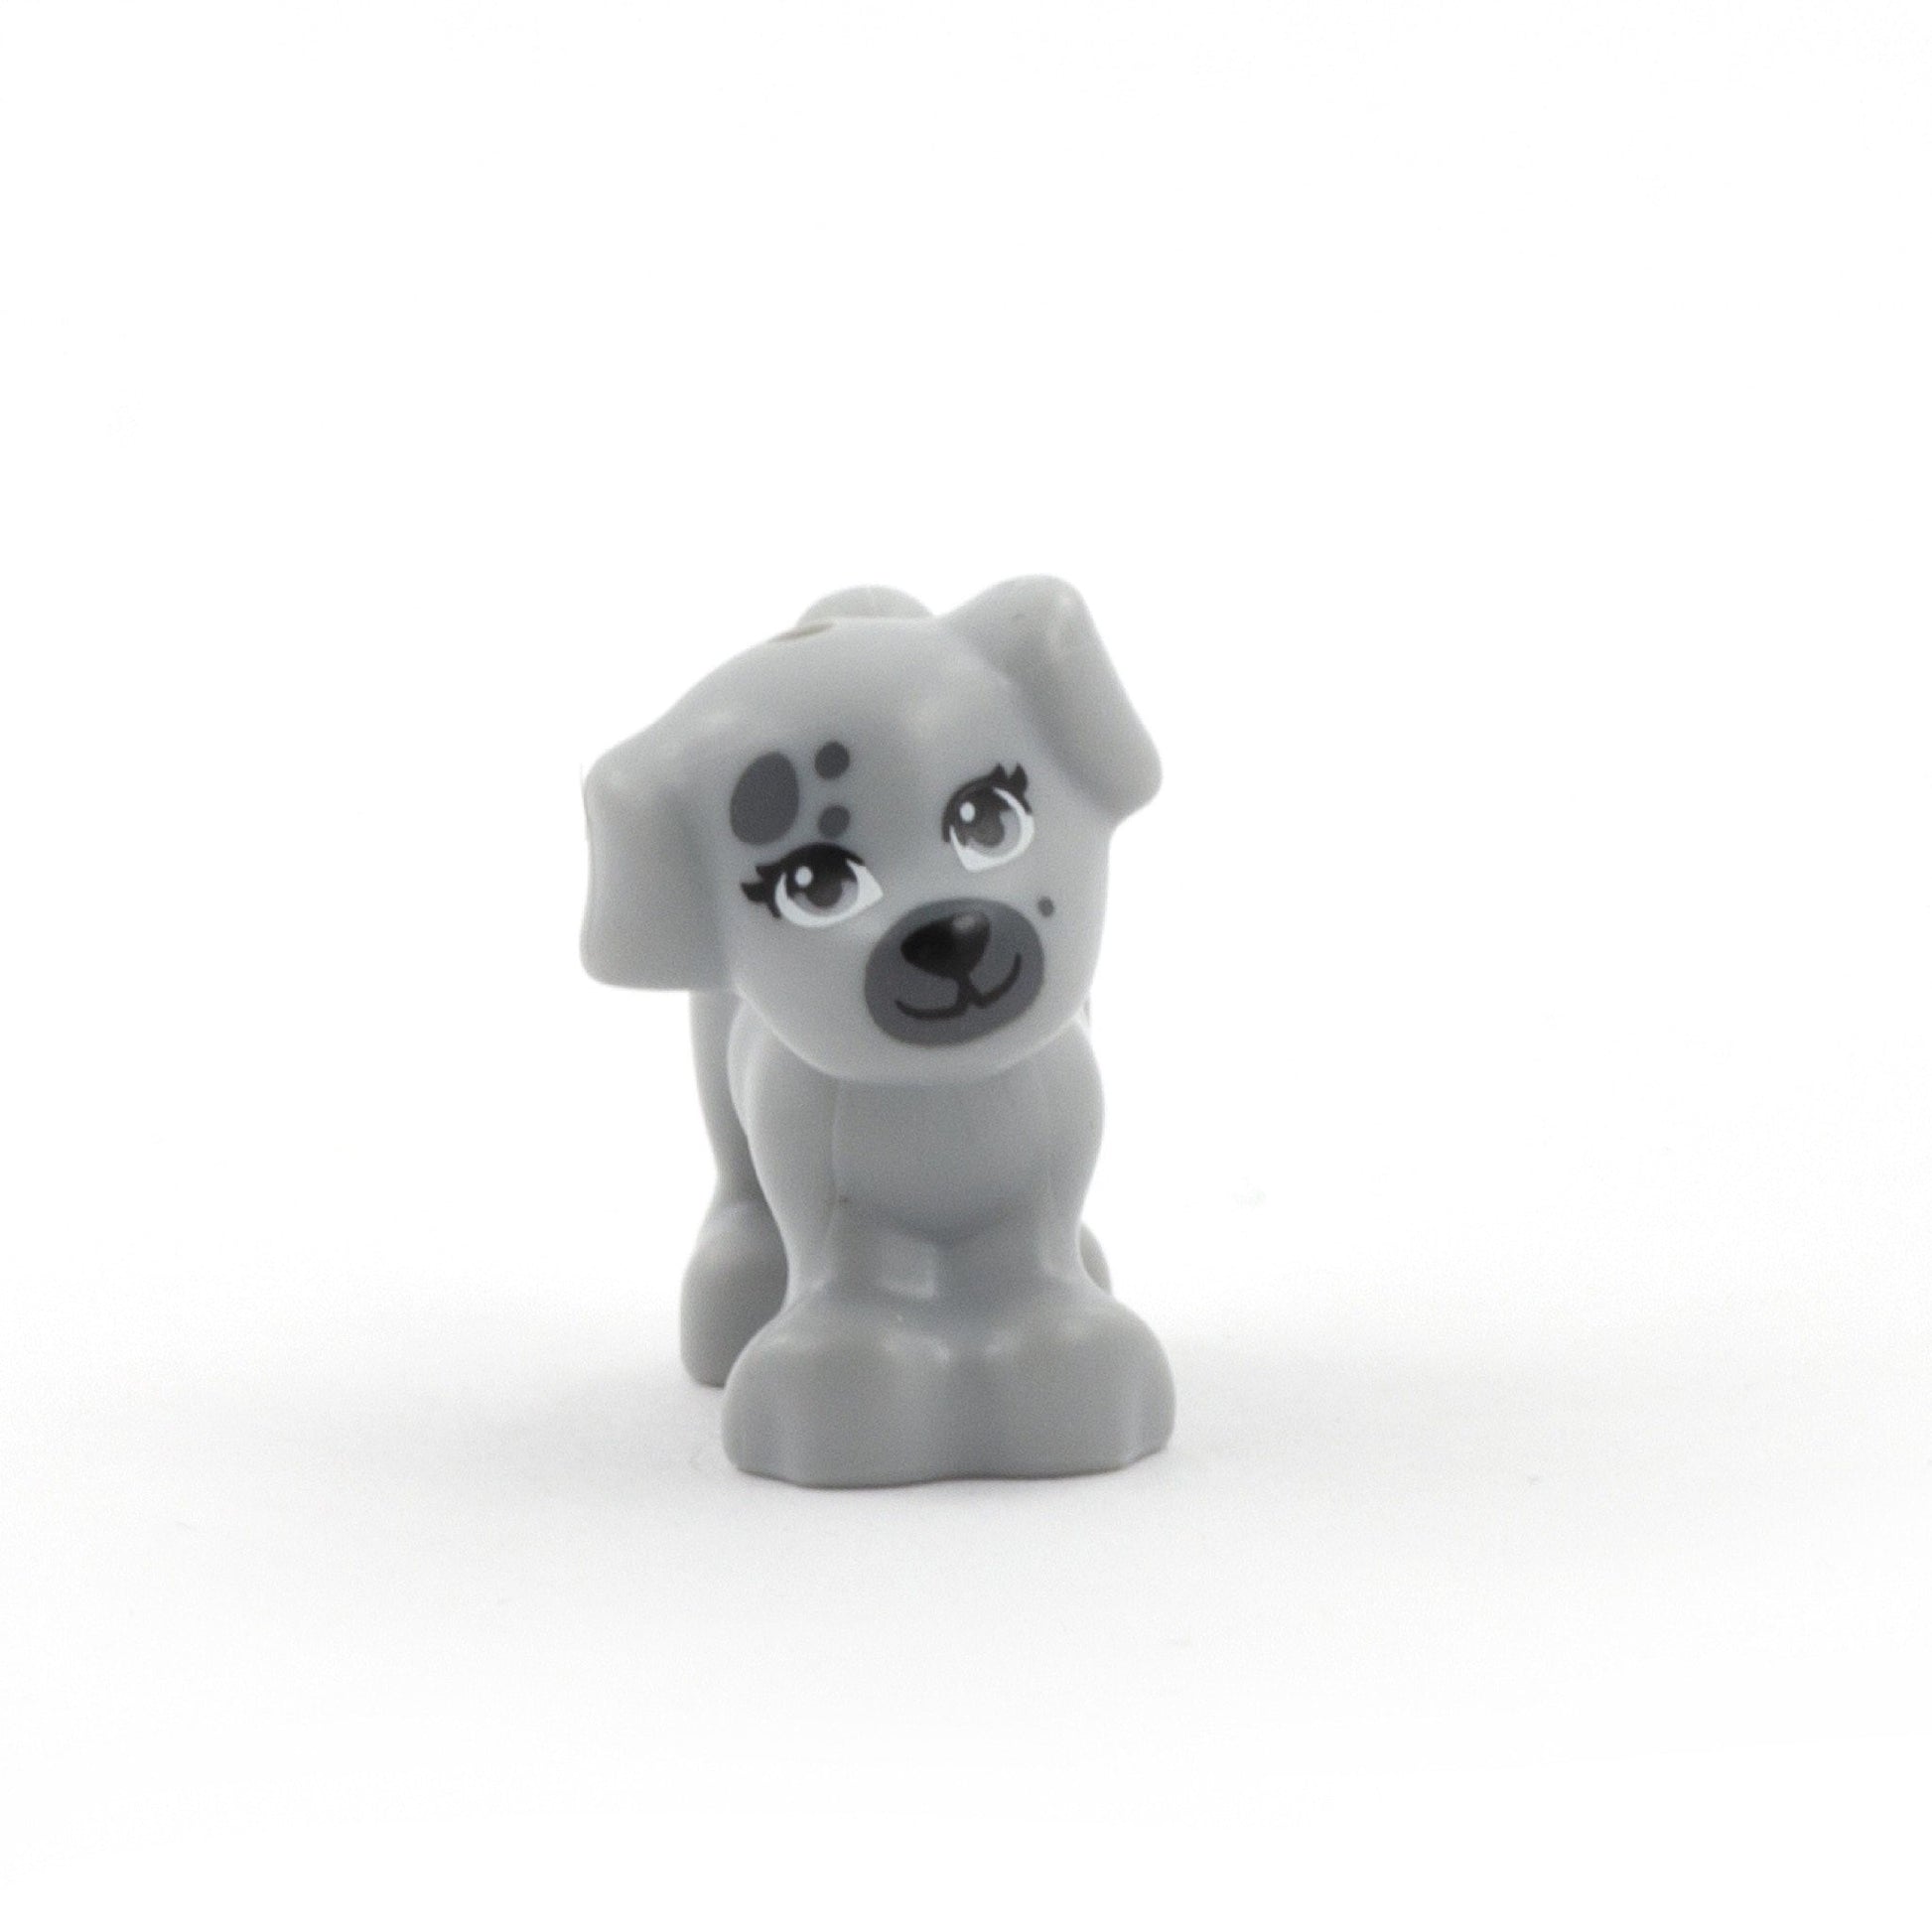 Little LEGO Dog (Light Grey with Darker Patches)